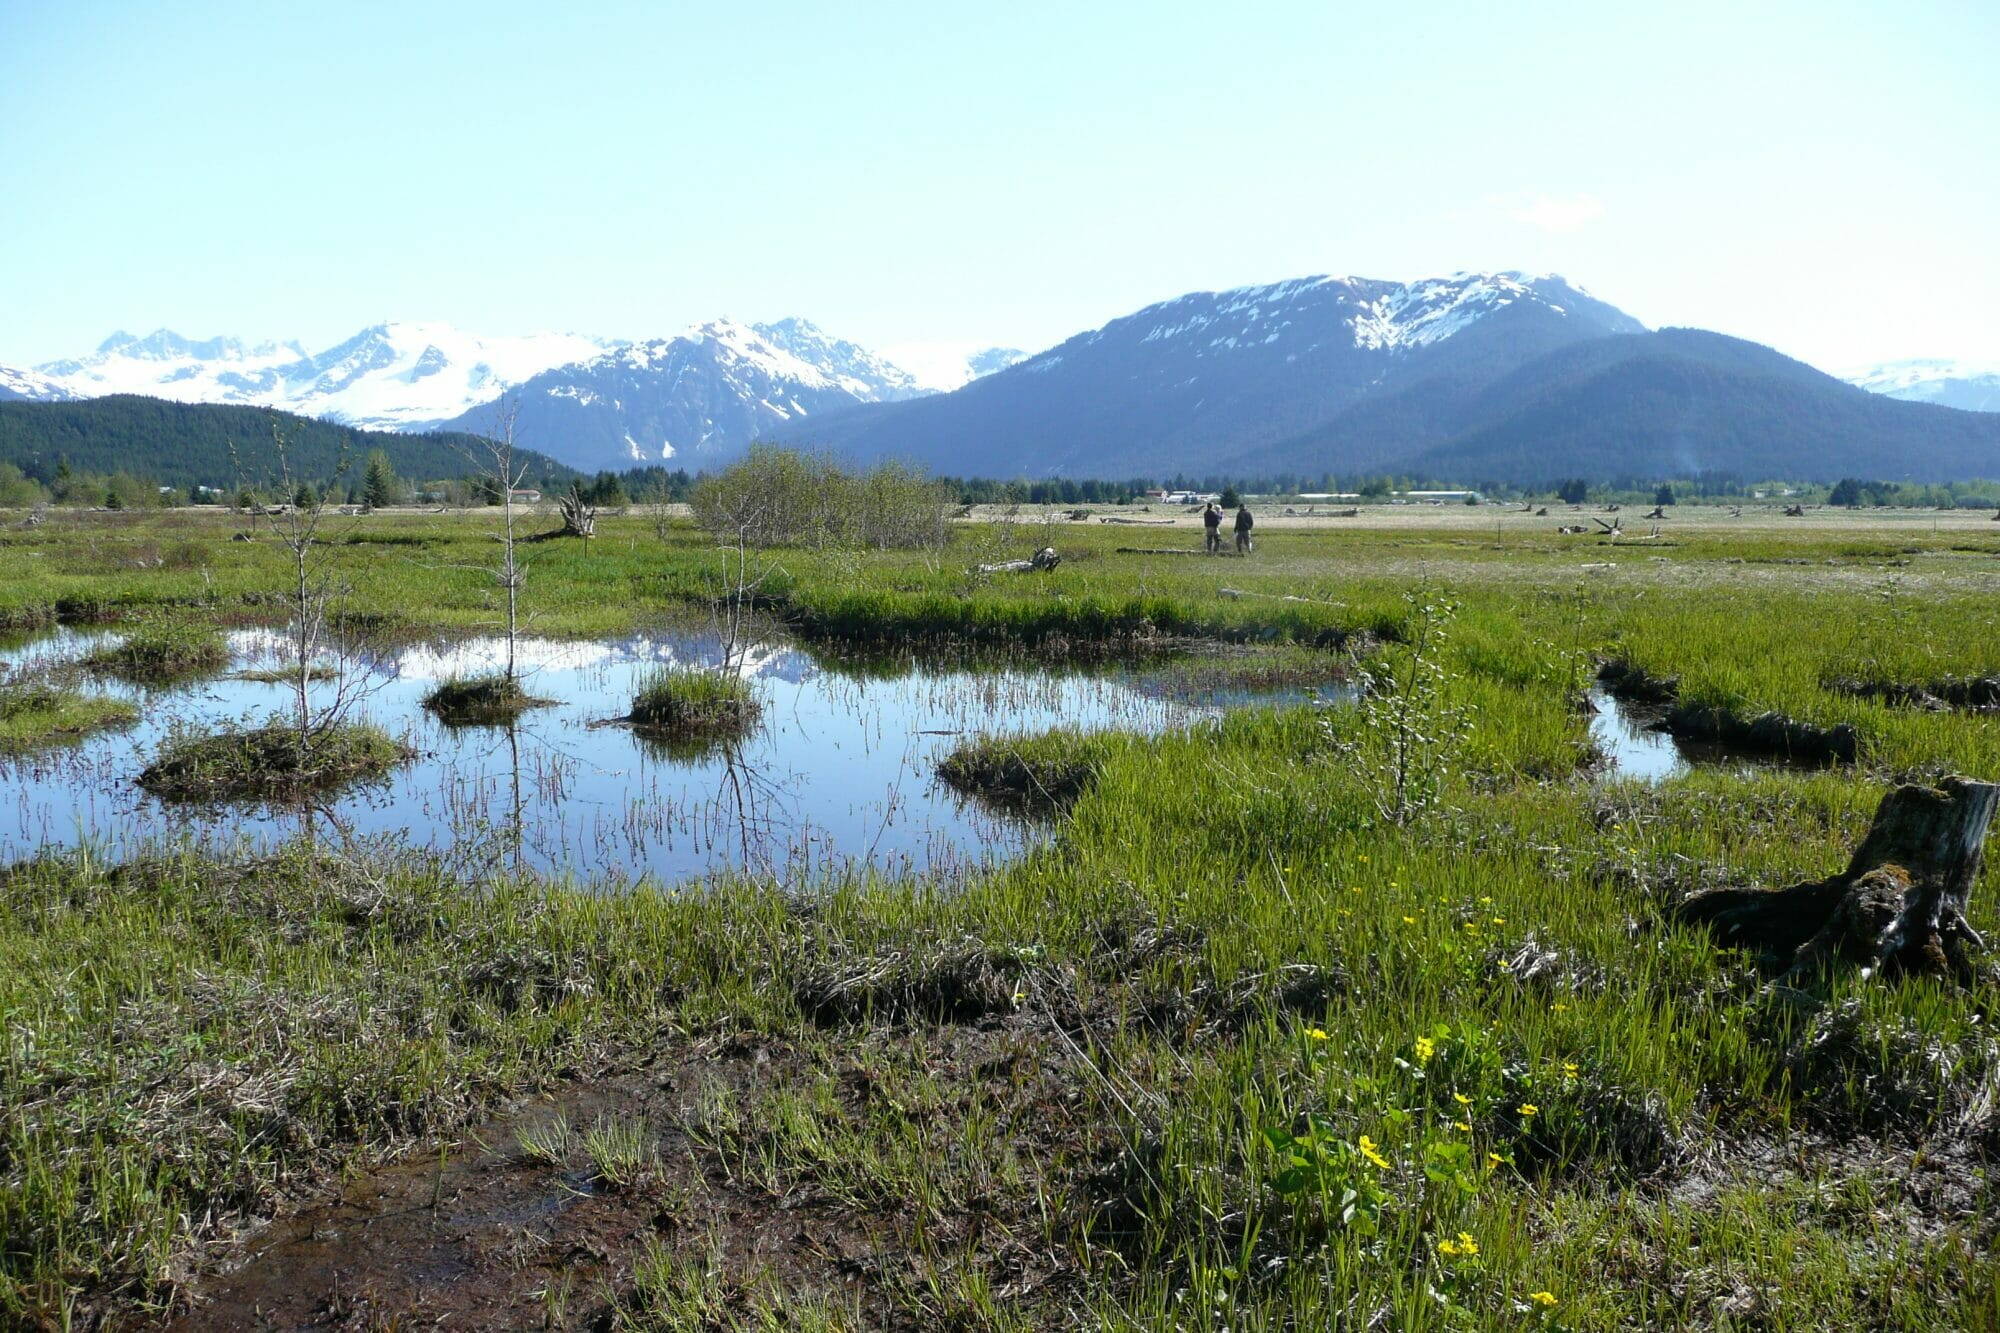 Wigeon Ponds is one of the areas adjacent to the Mendenhall Wetlands State Game Refuge purchased by the Southeast Alaska Land Trust, which is producing an updated digital map of the entire wetlands area. (U.S. Fish and Wildlife Service photo)